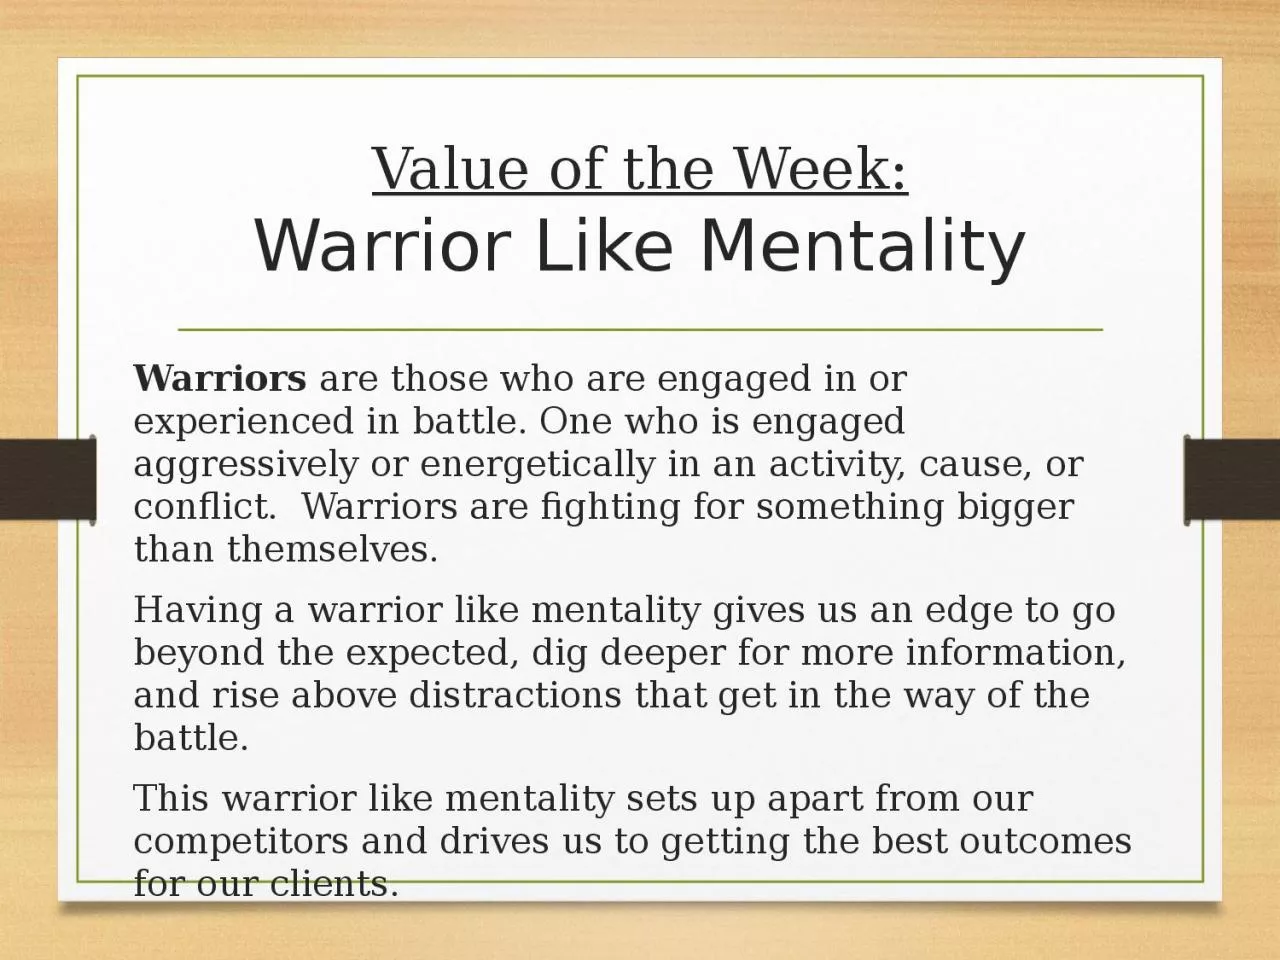 Value of the Week: Warrior Like Mentality